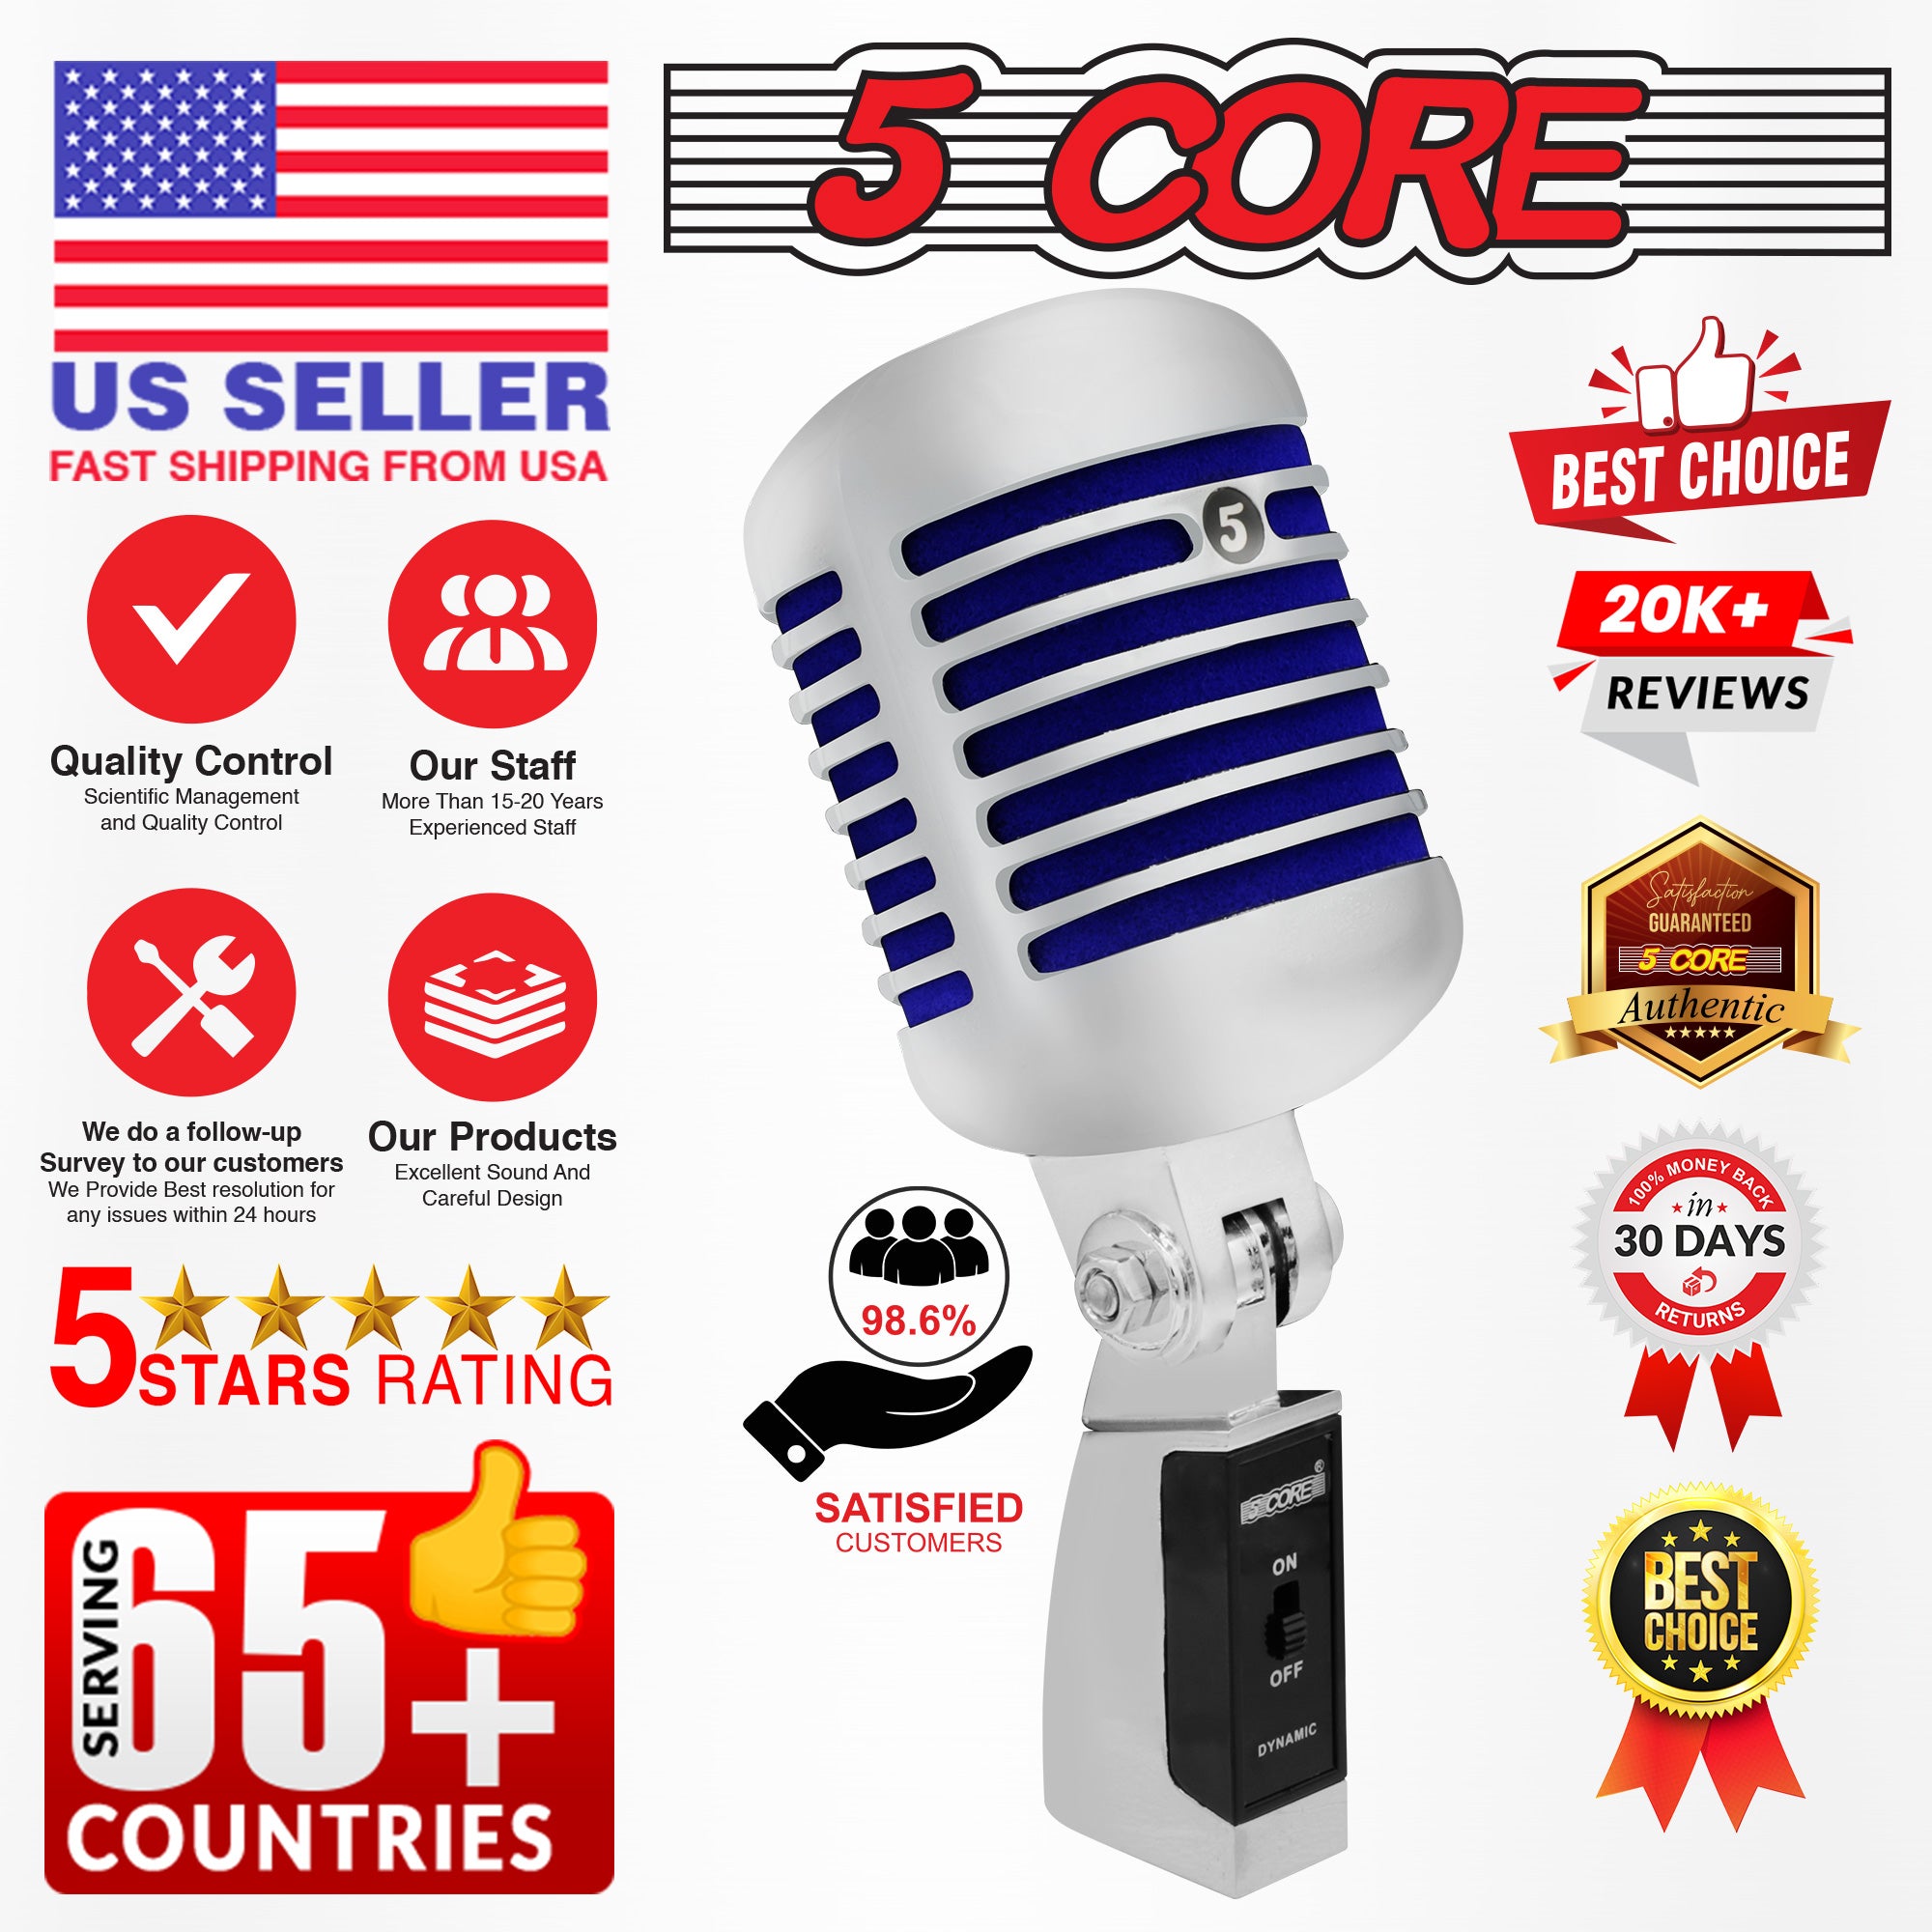 5Core Professional Vintage Microphone for Singing Dynamic Super Cardiod XLR Old Retro Wired Vocal Mic